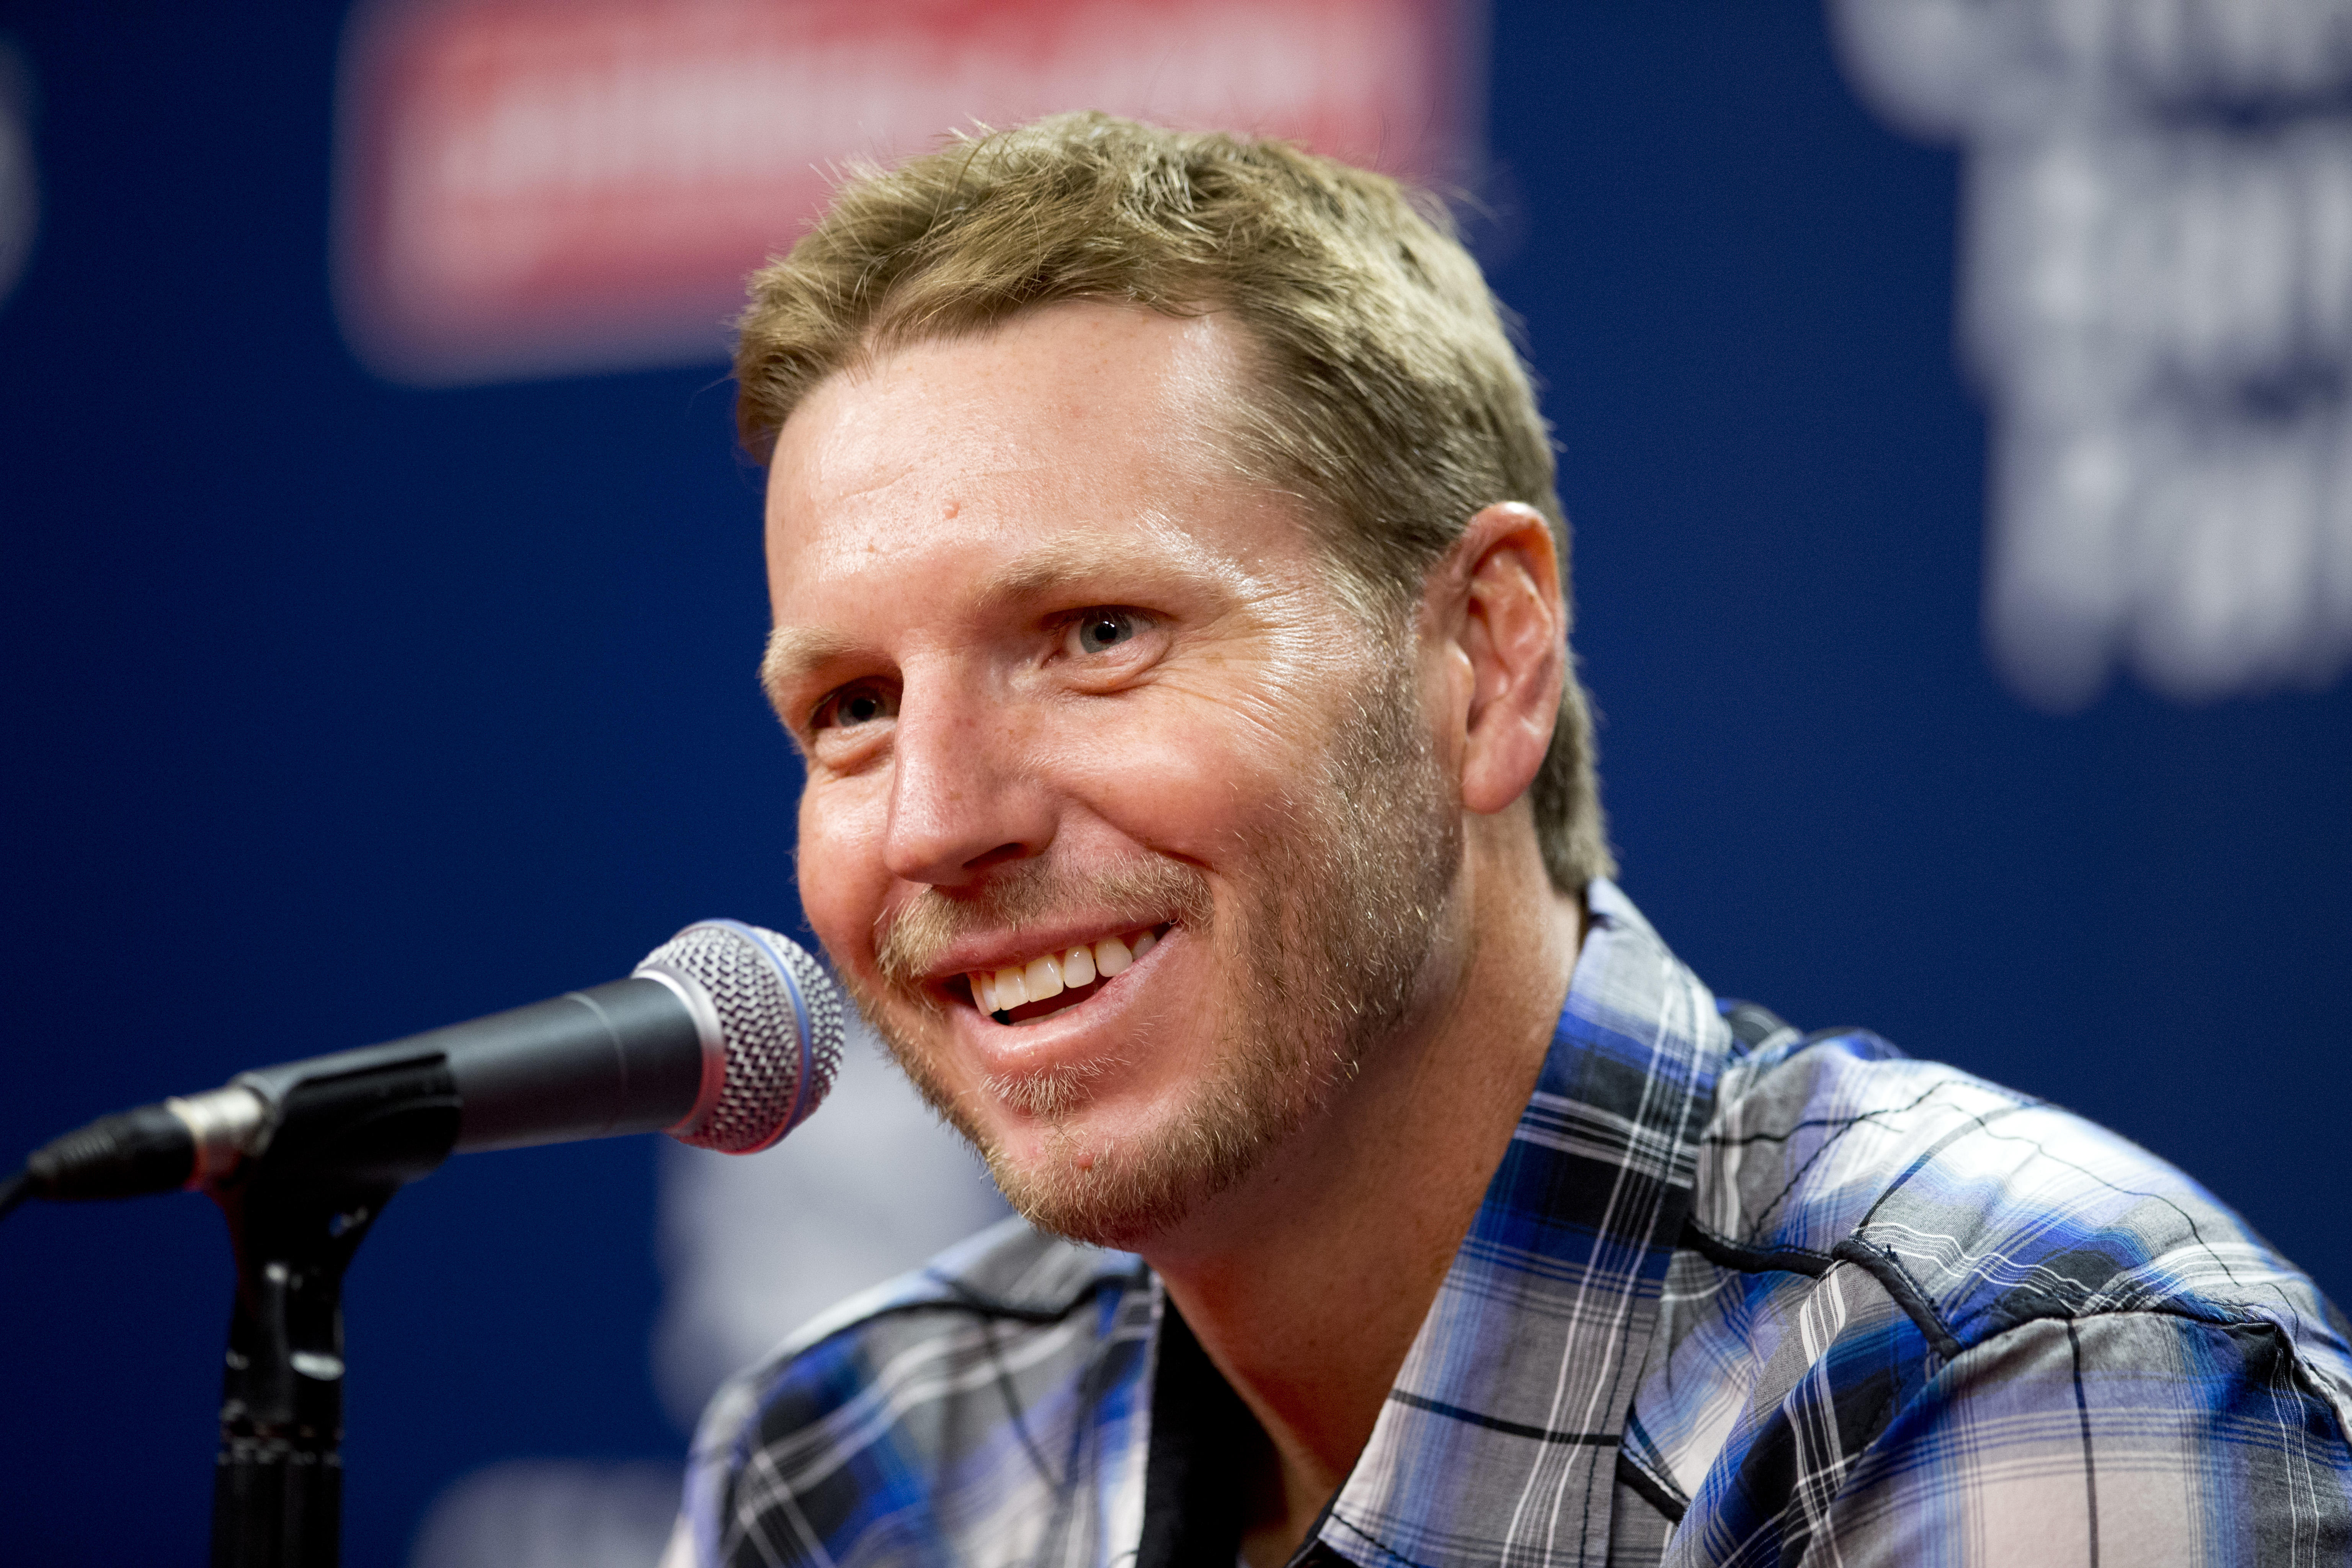 Roy Halladay's Wife Recalls Ex-MLB Pitcher's Struggles with Chronic Pain,  Drugs, News, Scores, Highlights, Stats, and Rumors